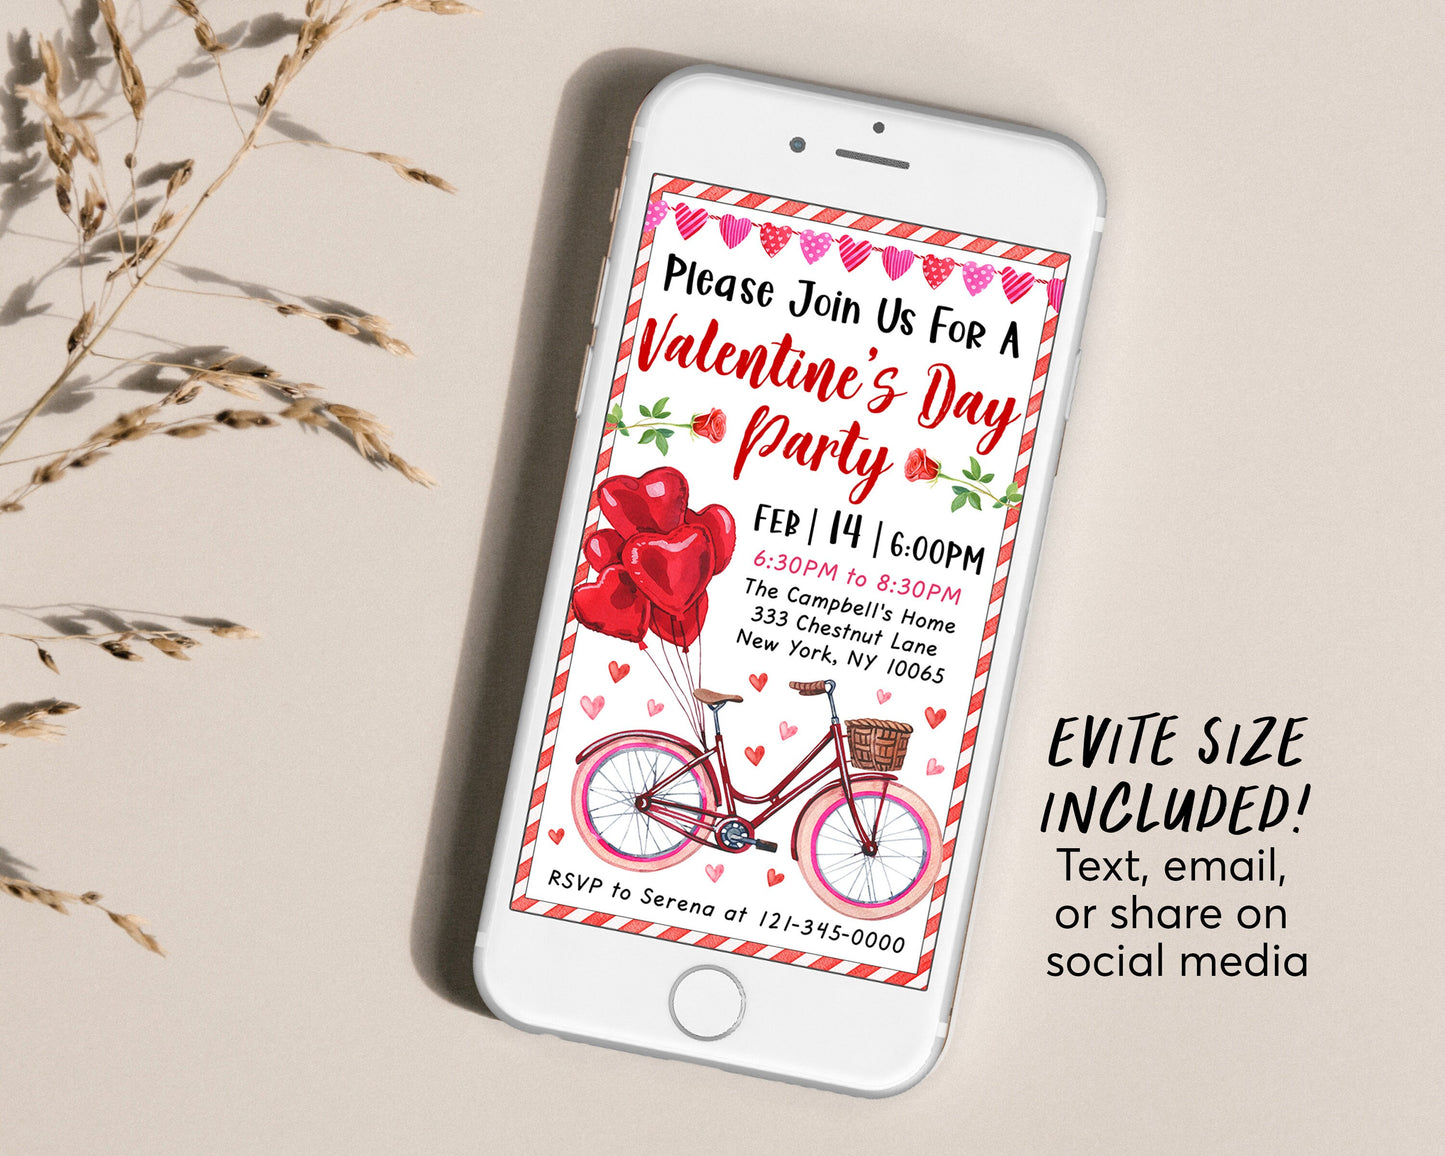 Valentines Day Party Invitation Editable Template, Happy Galentine's Day Girls Night Dinner Lunch Invite, Bicycle Heart Balloons Watercolor